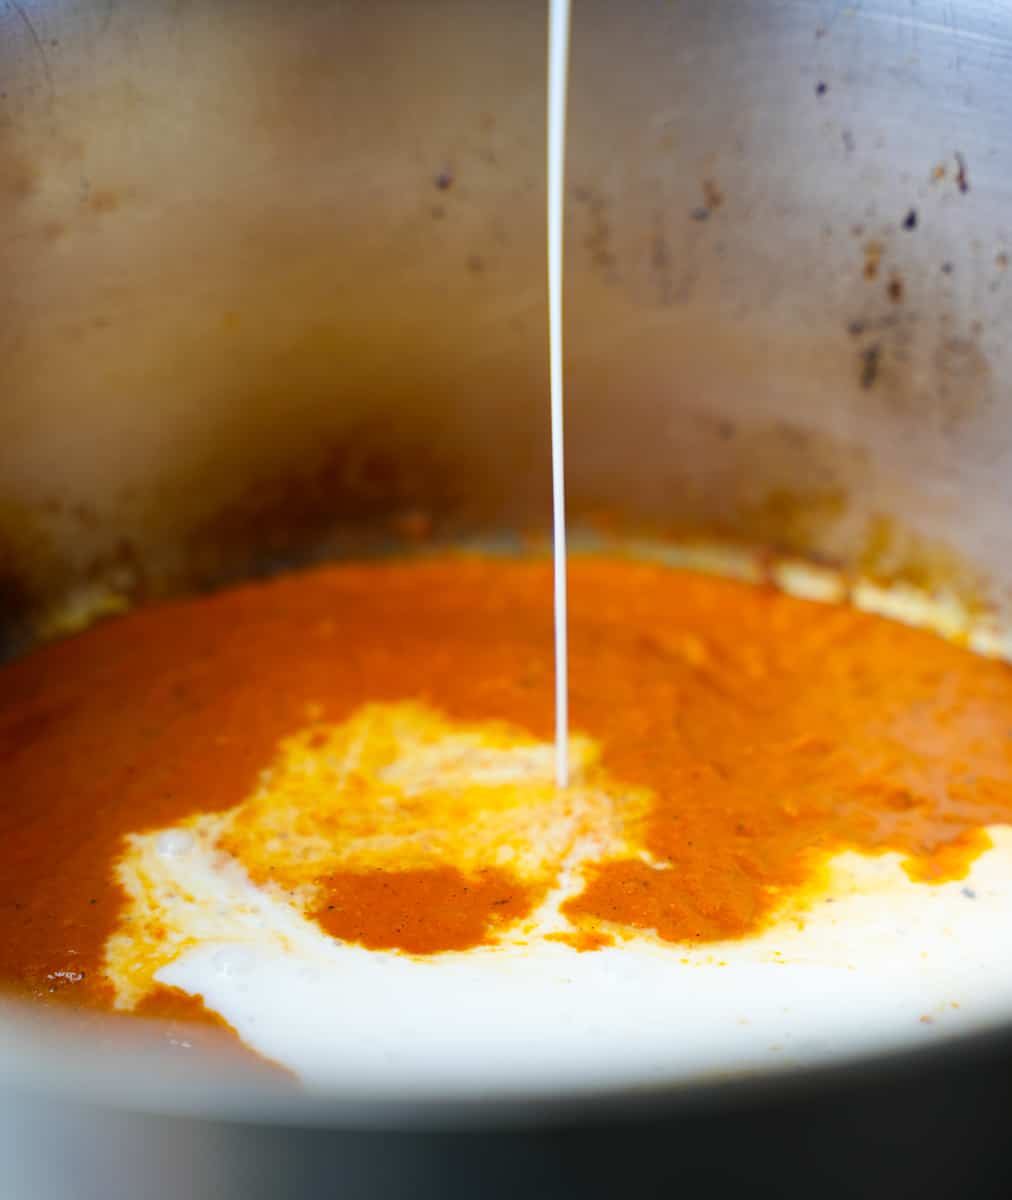 Coconut milk is pored into the sauce in a metal pot.